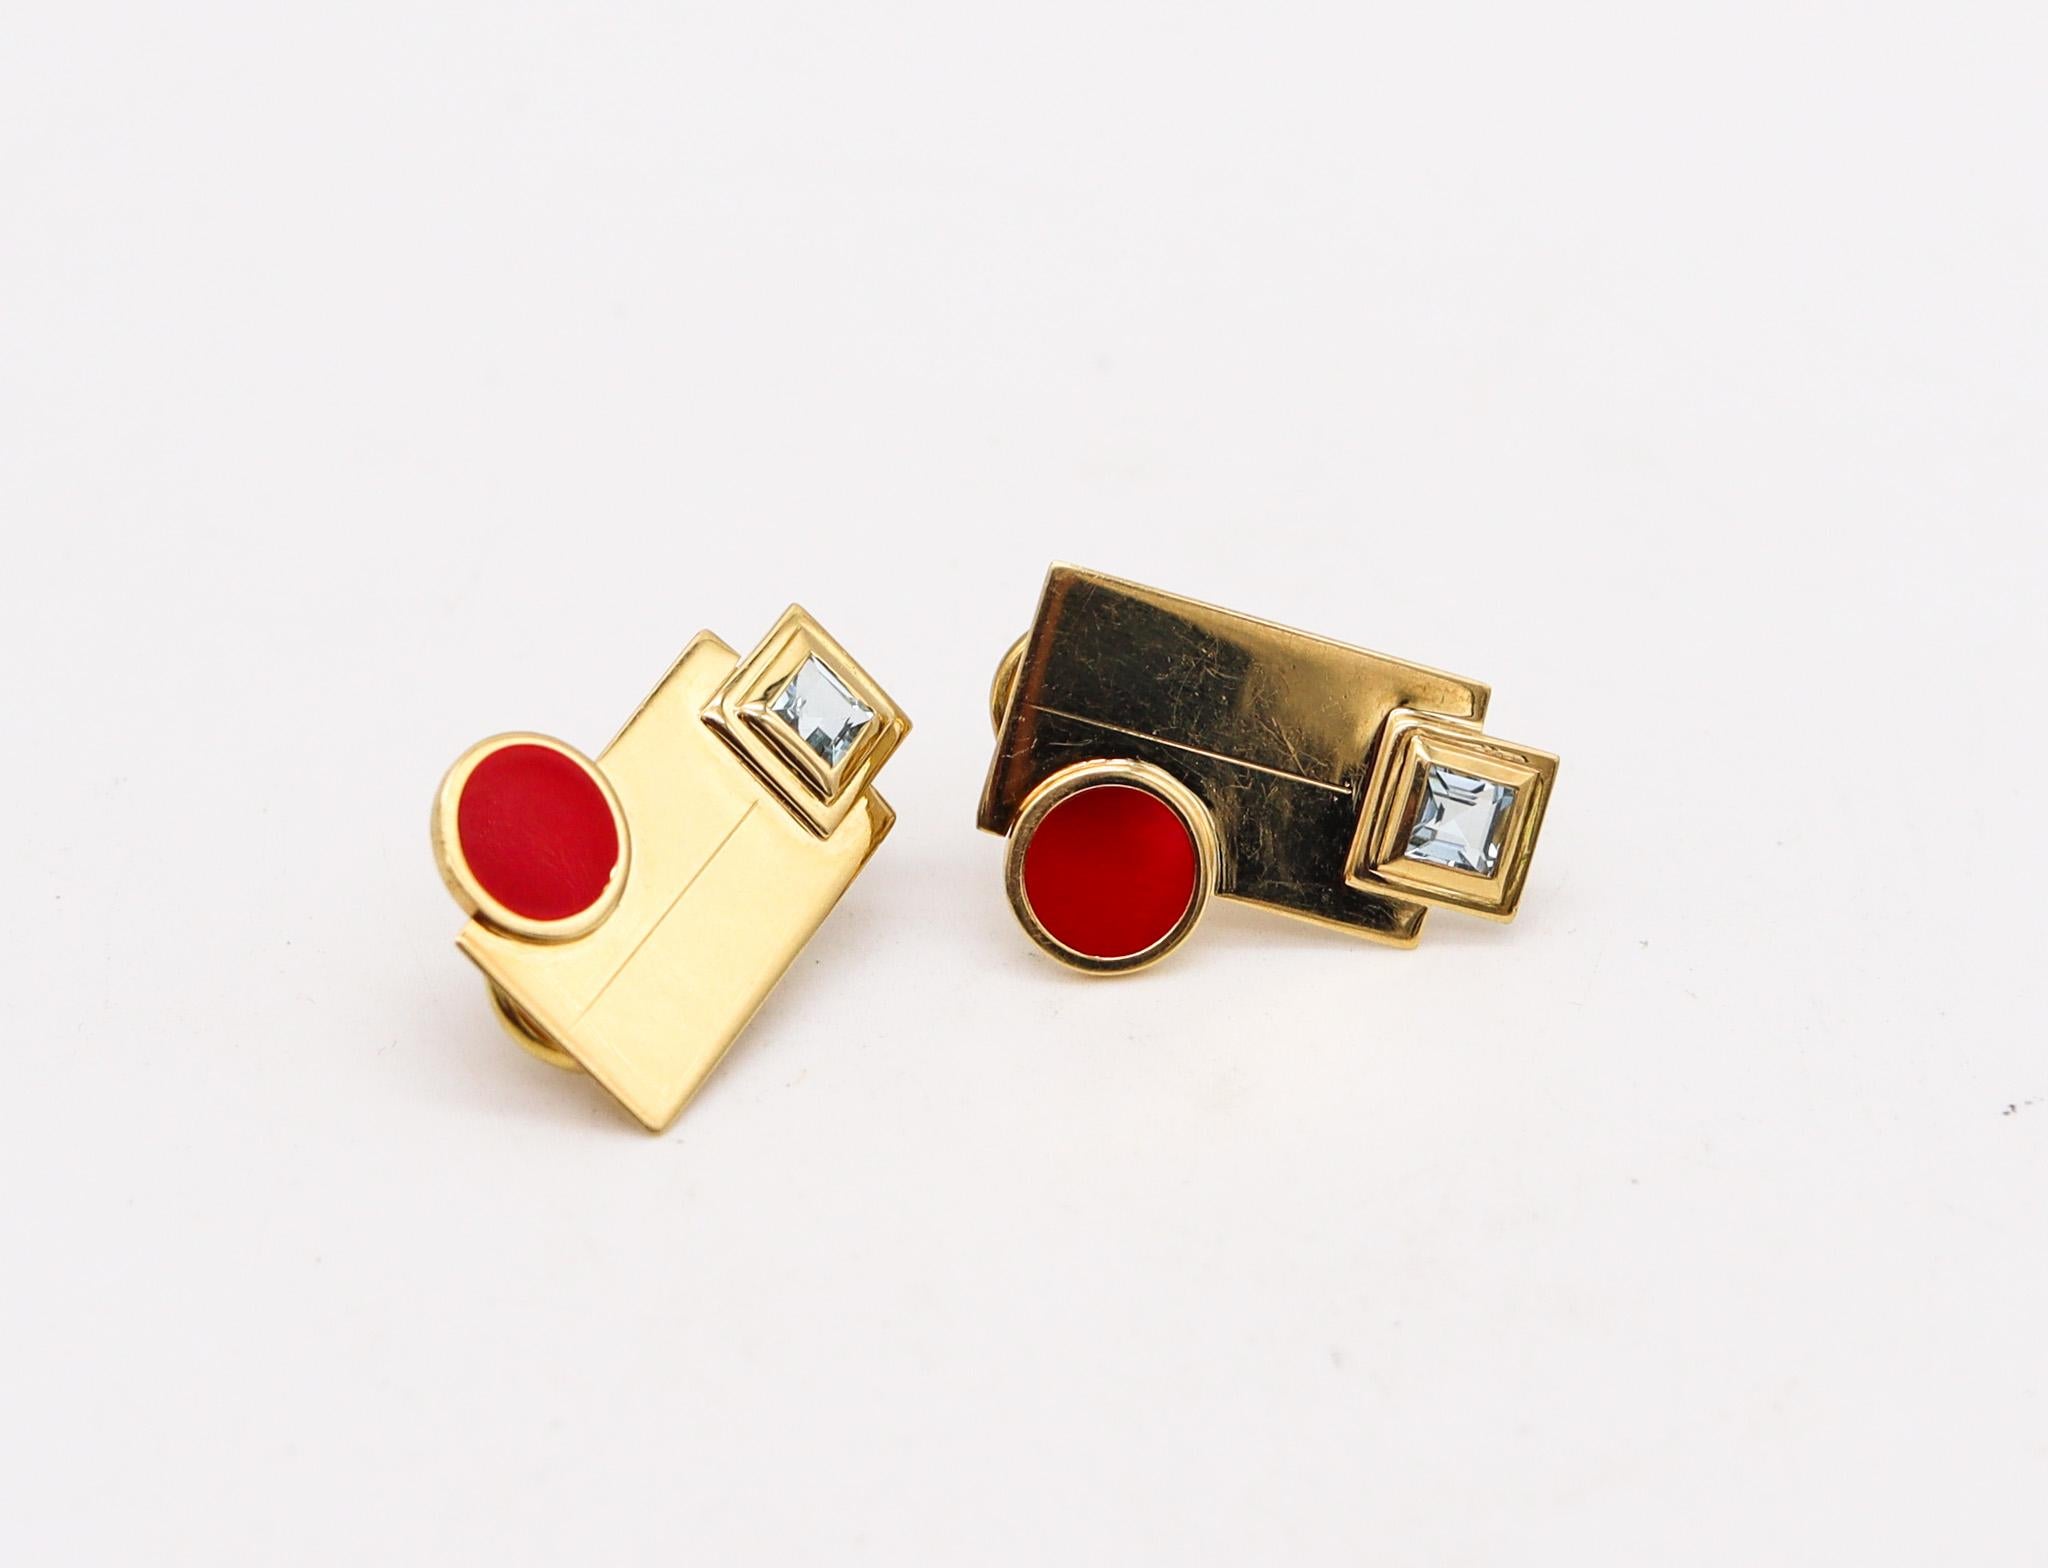 Modernist Manfredi 1990 Geometric Red Earrings In 18Kt Yellow Gold With Two Aquamarines For Sale